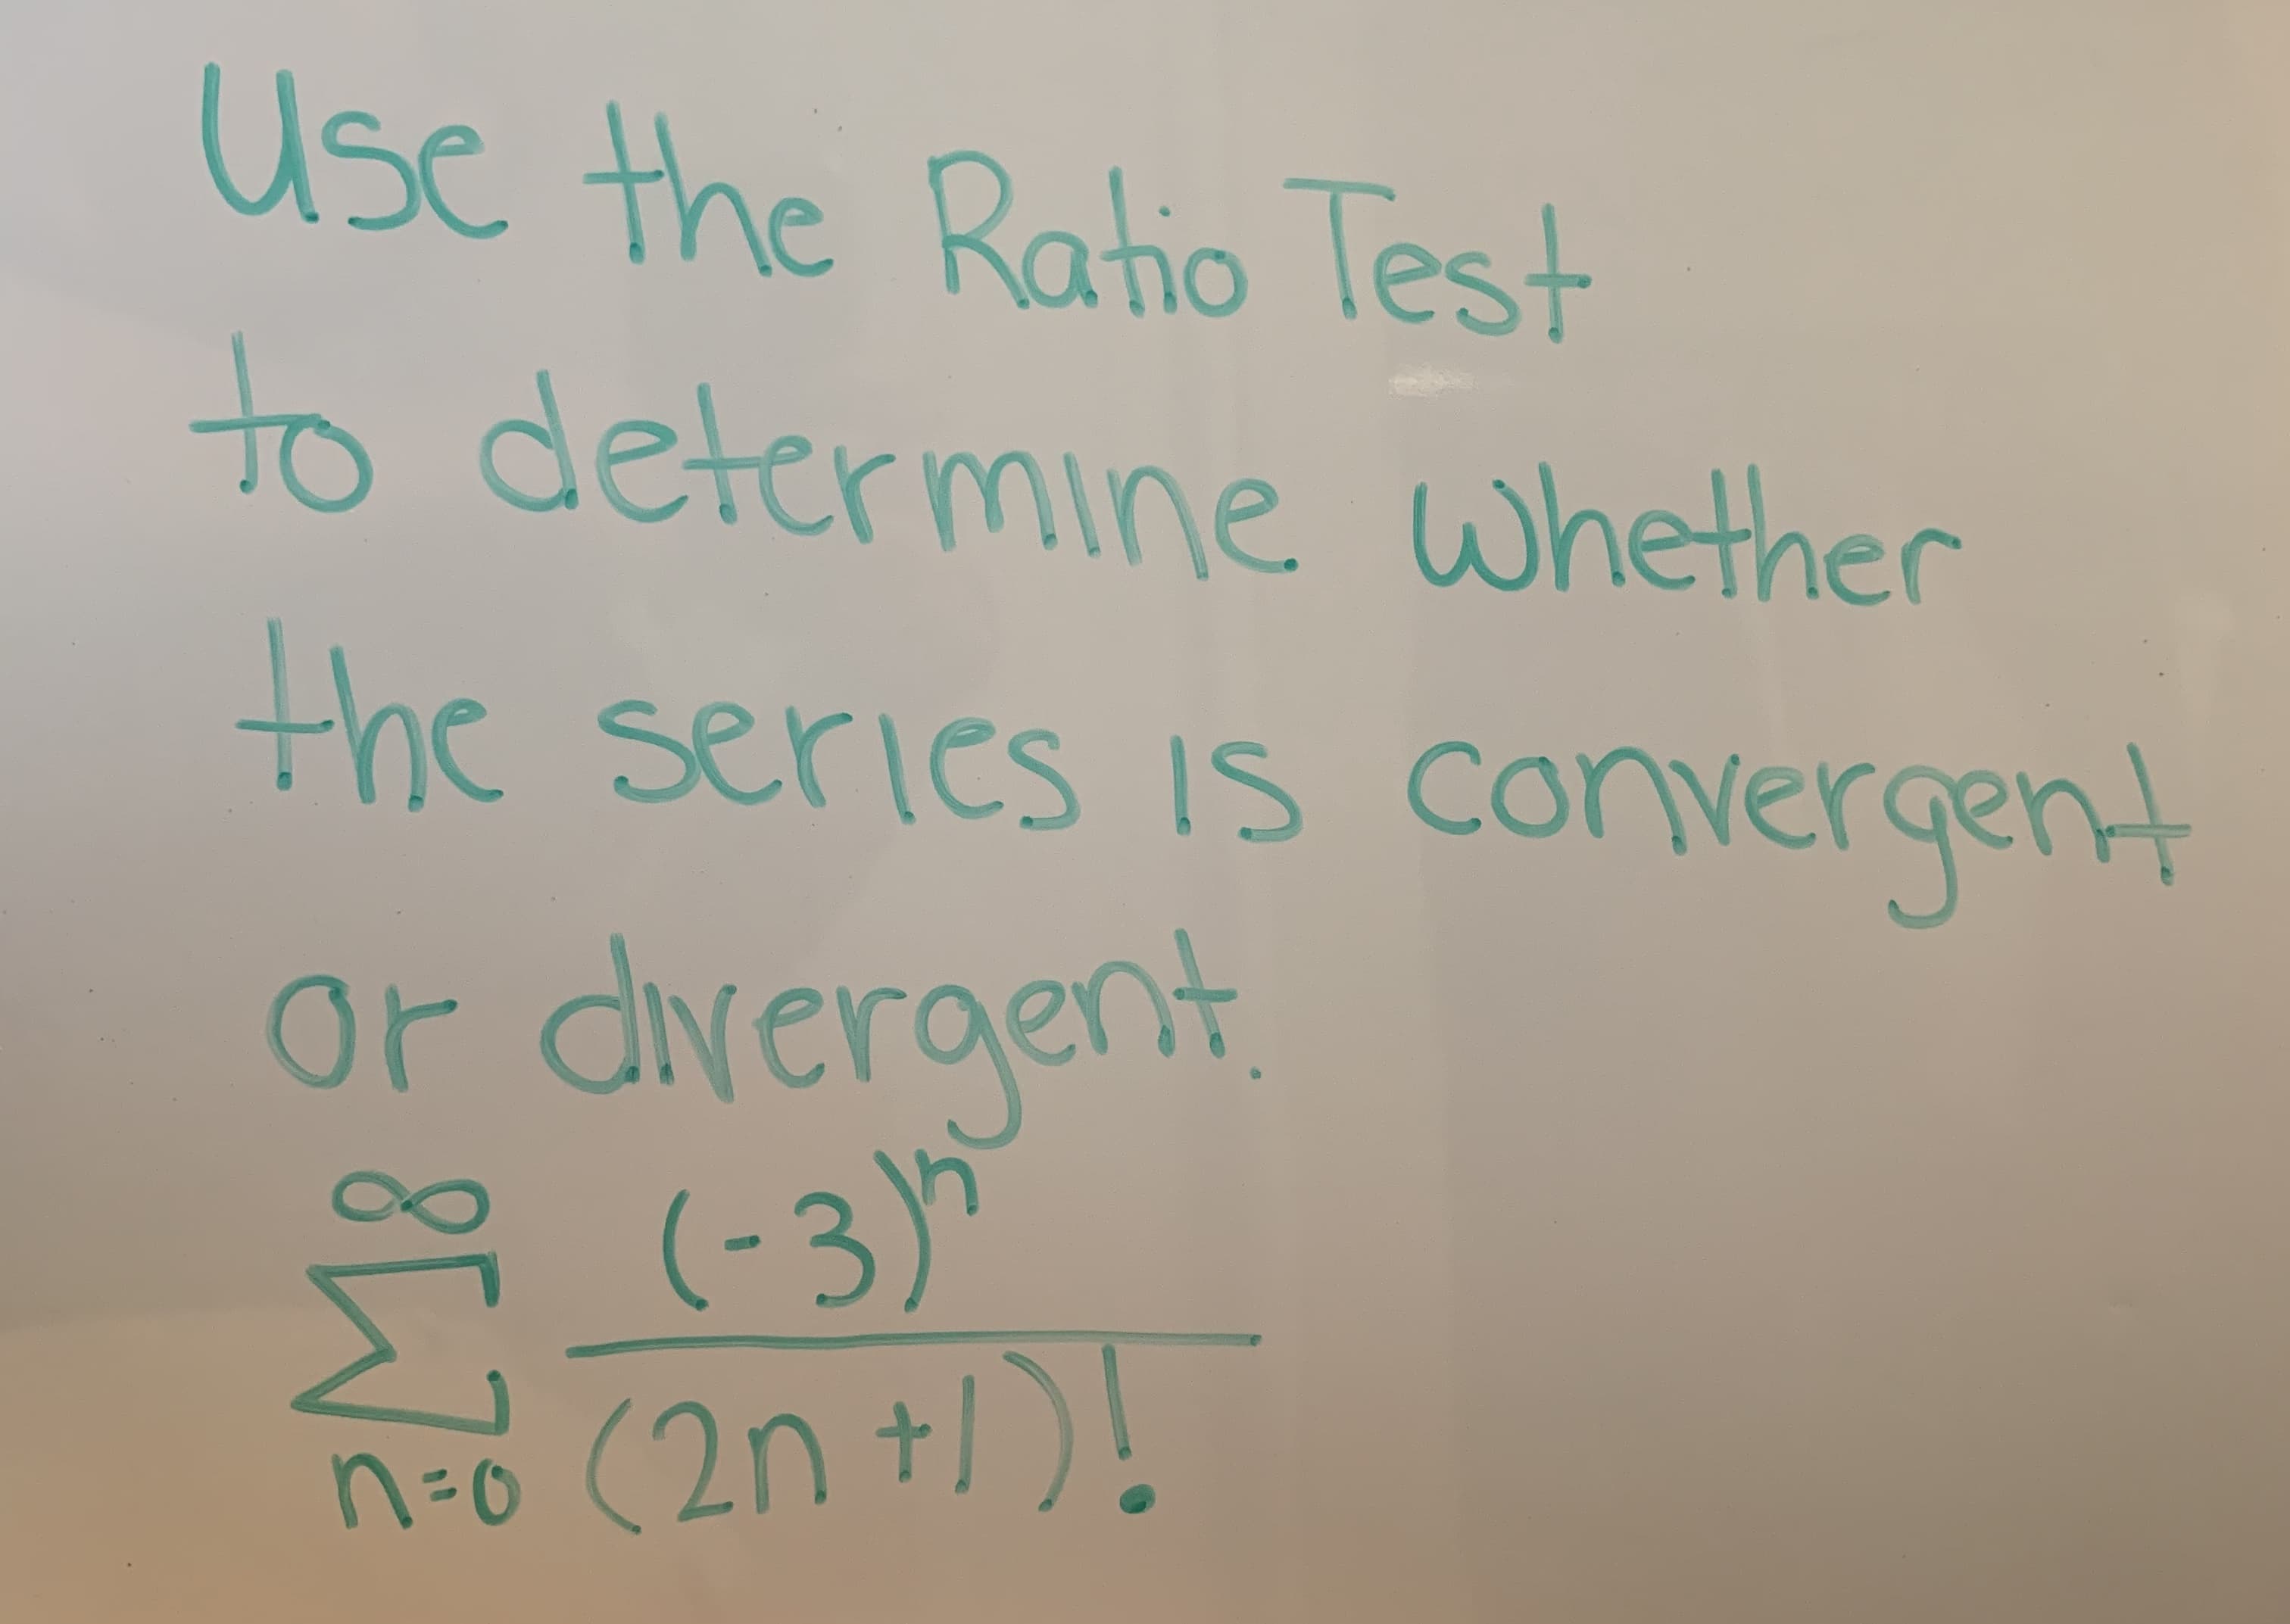 Use the Raho Test
to determine whether
thc serics is convergen
Or divergent
oo(-3
n 0
